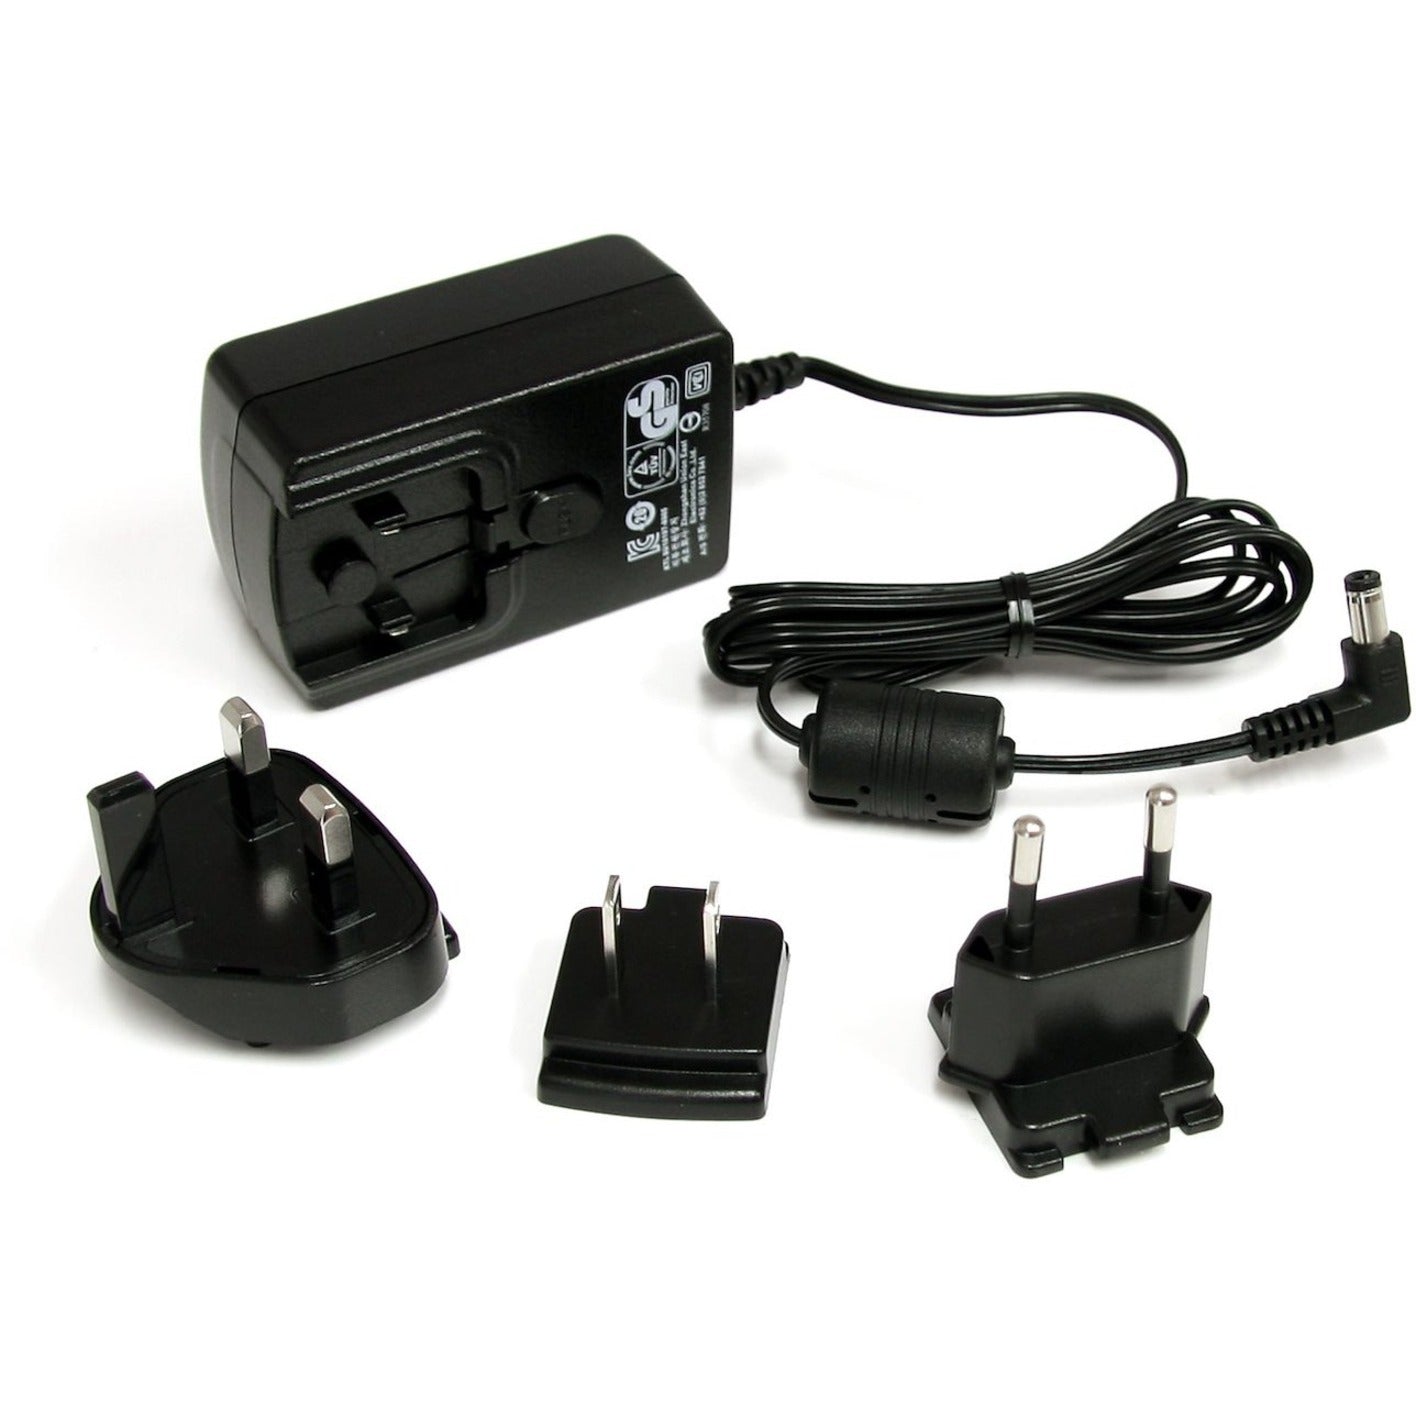 StarTech.com IM12D1500P 12V DC 1.5A Universal Power Adapter, Compact and Efficient Power Supply